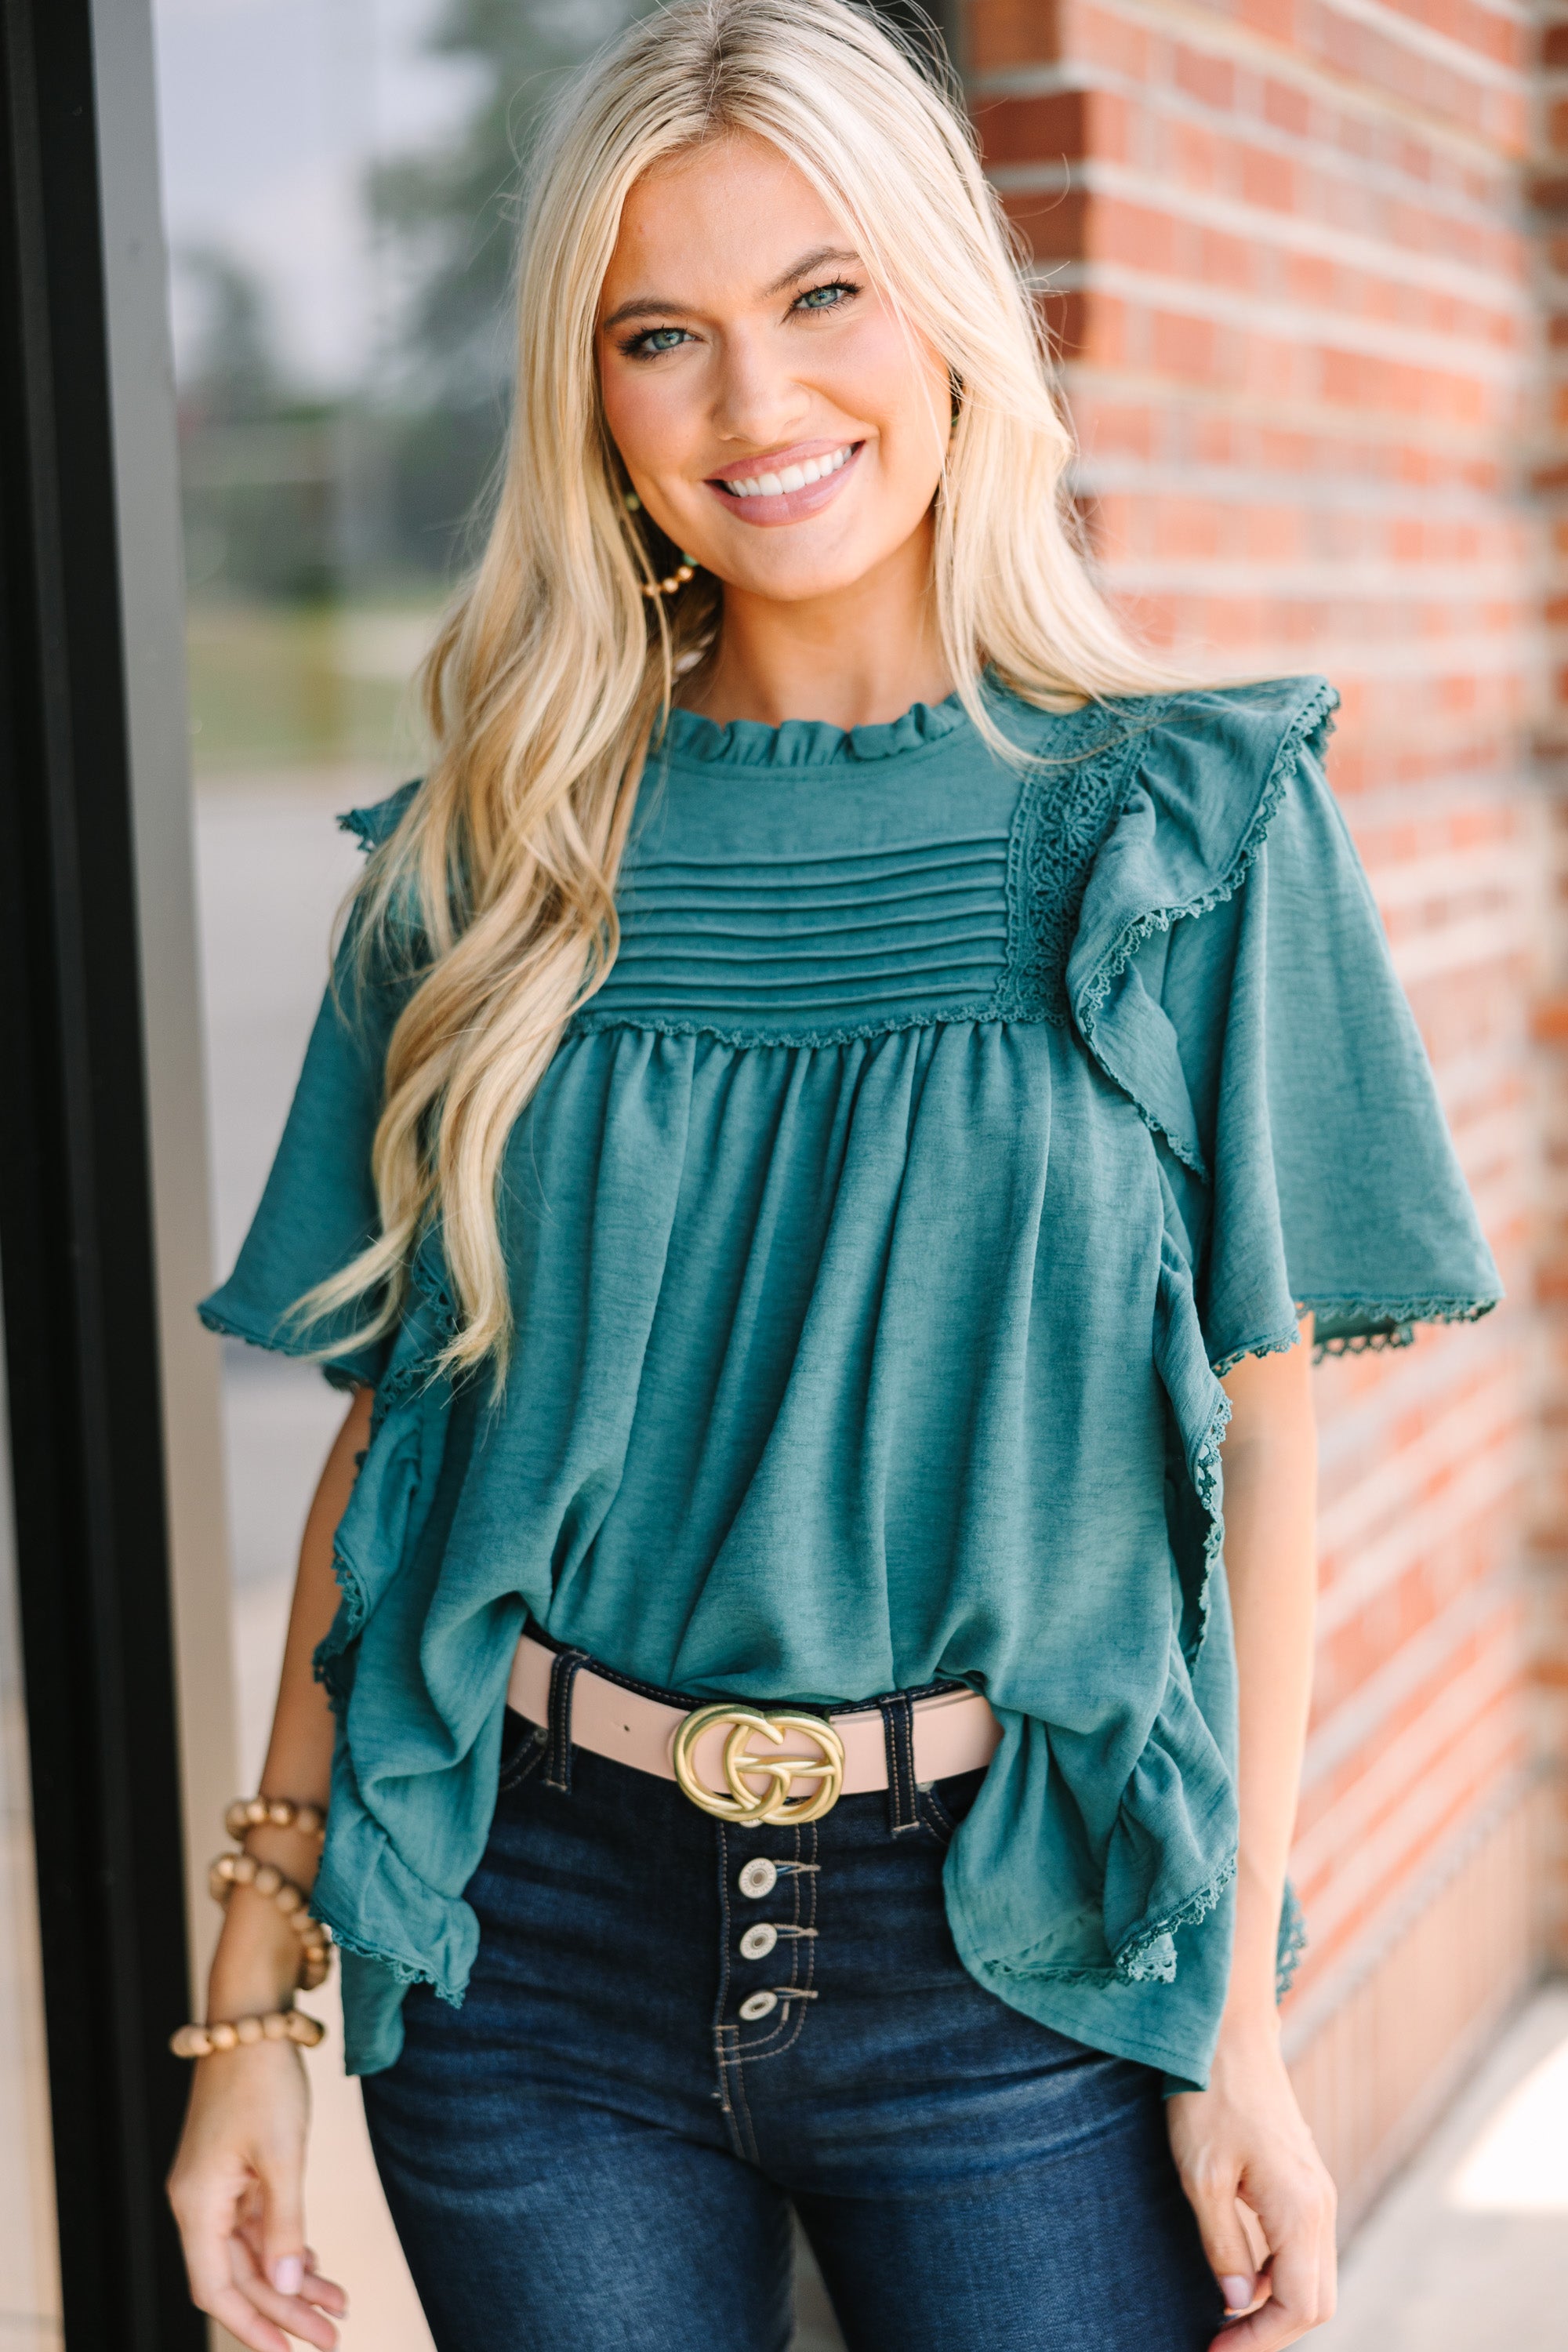 The Slouchy Heather Gray Bubble Sleeve Sweater – Shop the Mint